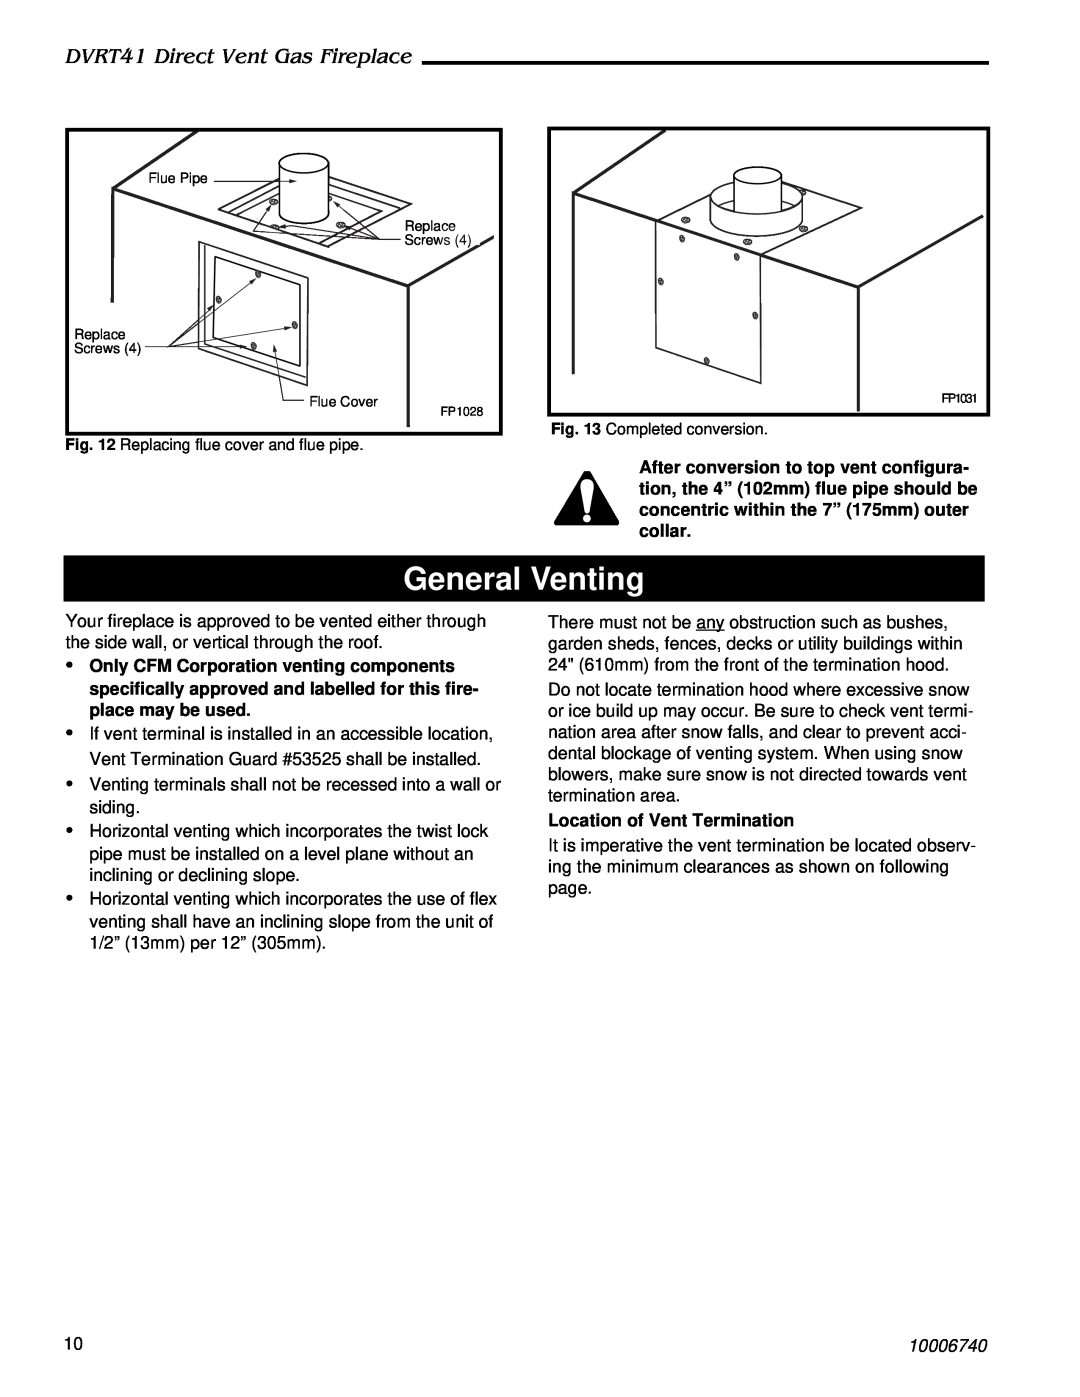 Vermont Casting manual General Venting, DVRT41 Direct Vent Gas Fireplace, 10006740 